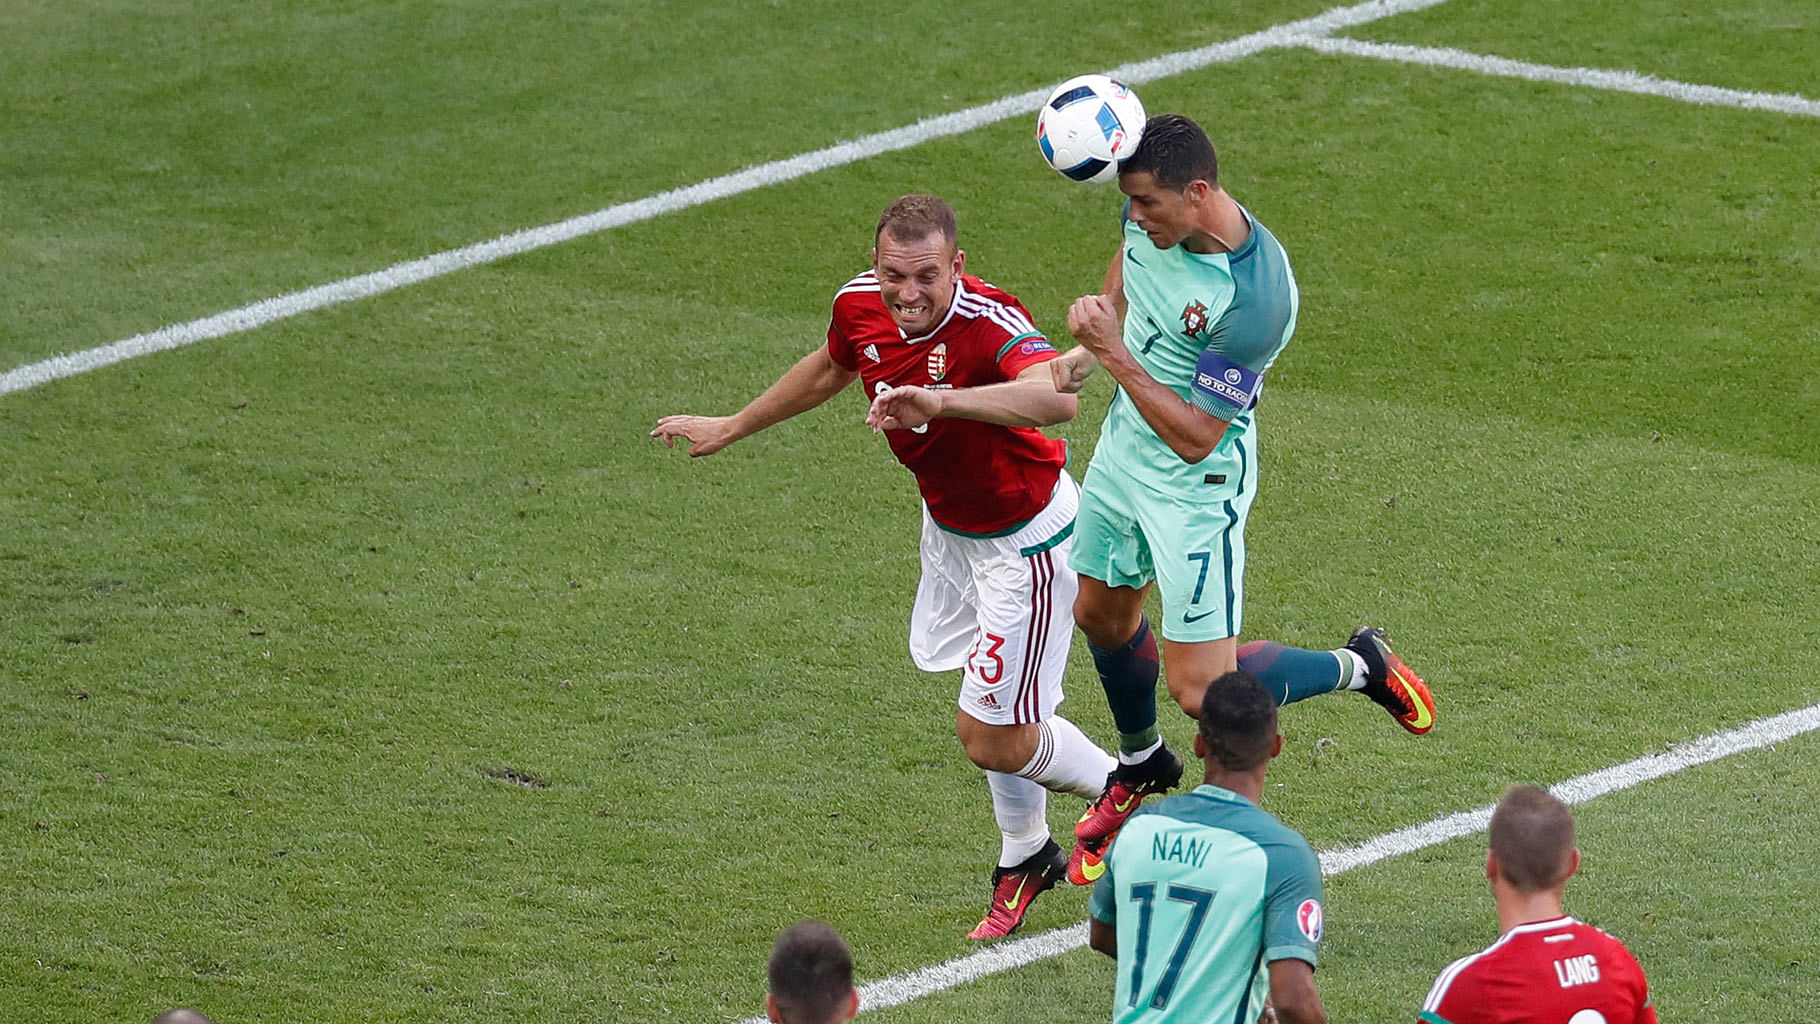 Cristiano Ronaldo scored two goals to bring Portugal on level terms with Hungary. (Photo: AP)